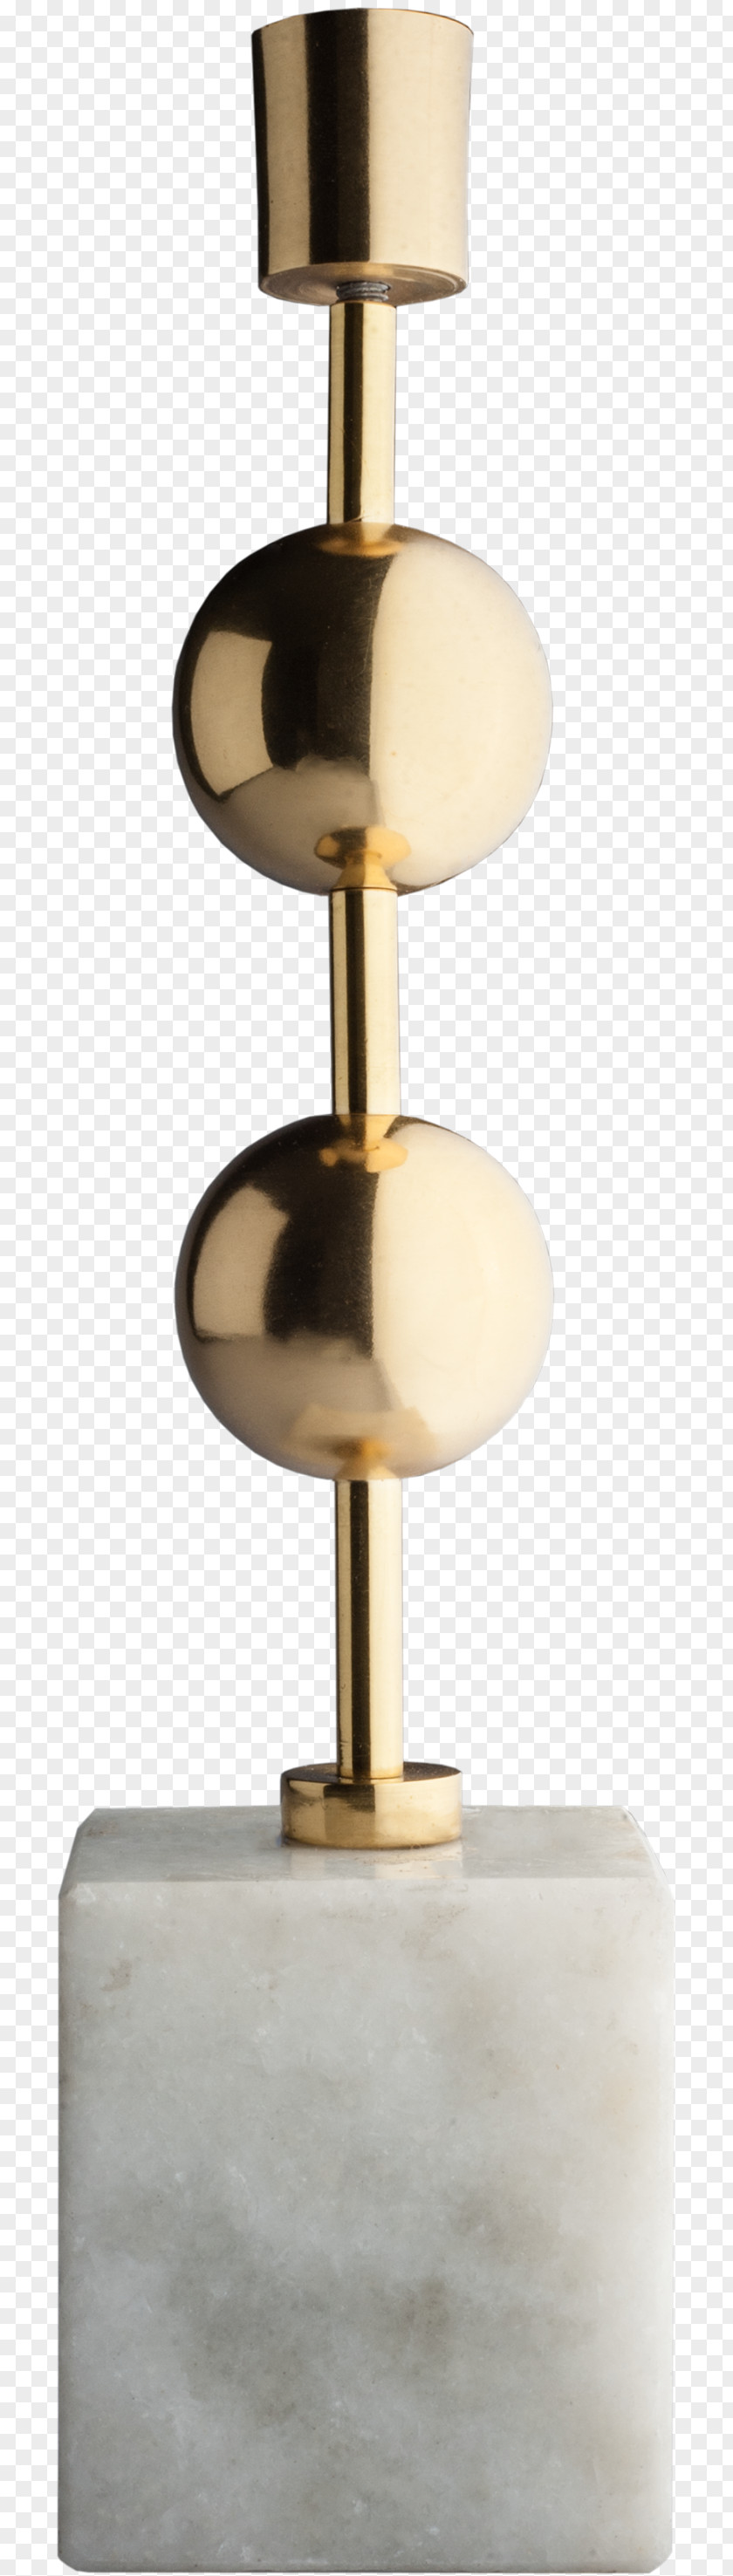 Brass Candlestick Lighting Metal Marble PNG